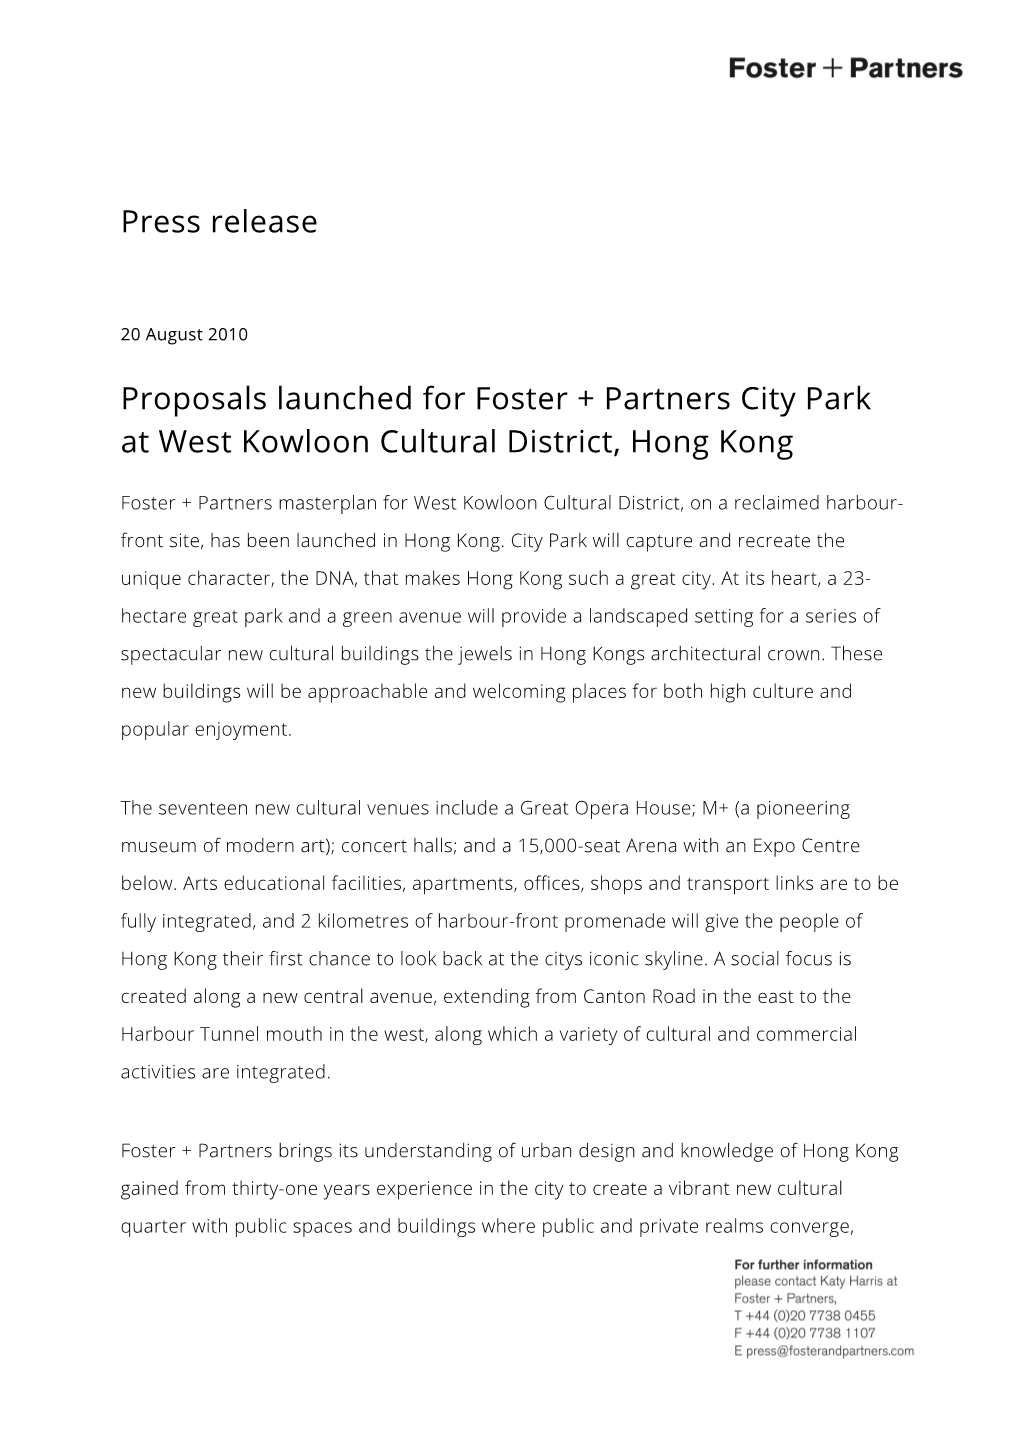 Press Release Proposals Launched for Foster + Partners City Park at West